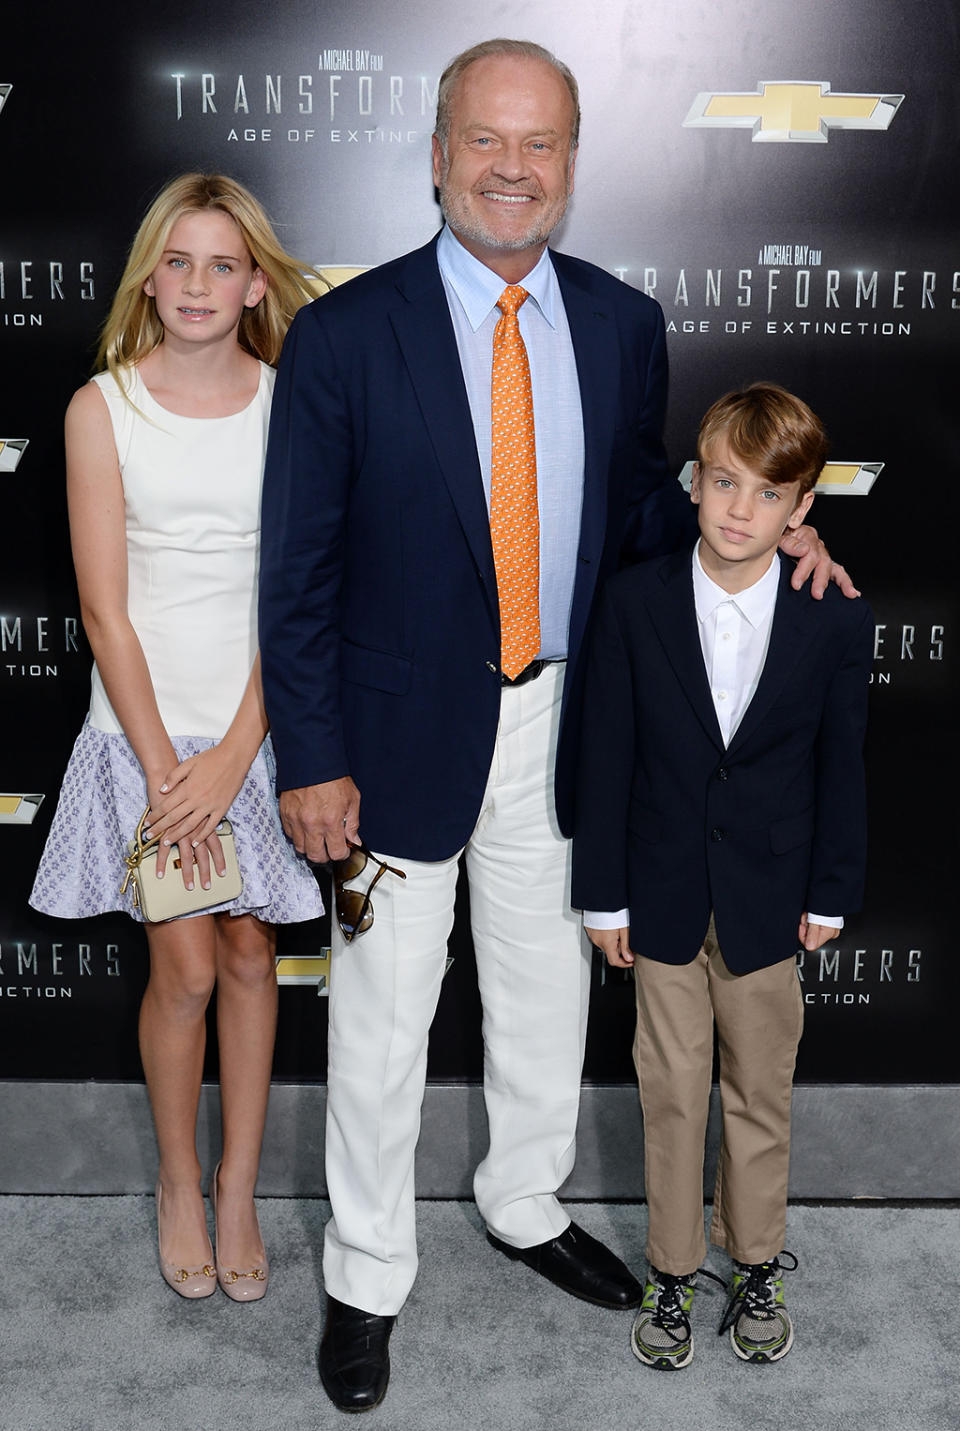 <p>Grammer — who plays a corrupt government agent in <em>Age of Extinction</em> — brings along children Jude and Mason to the New York premiere. (Photo: Dimitrios Kambouris/Getty Images) </p>